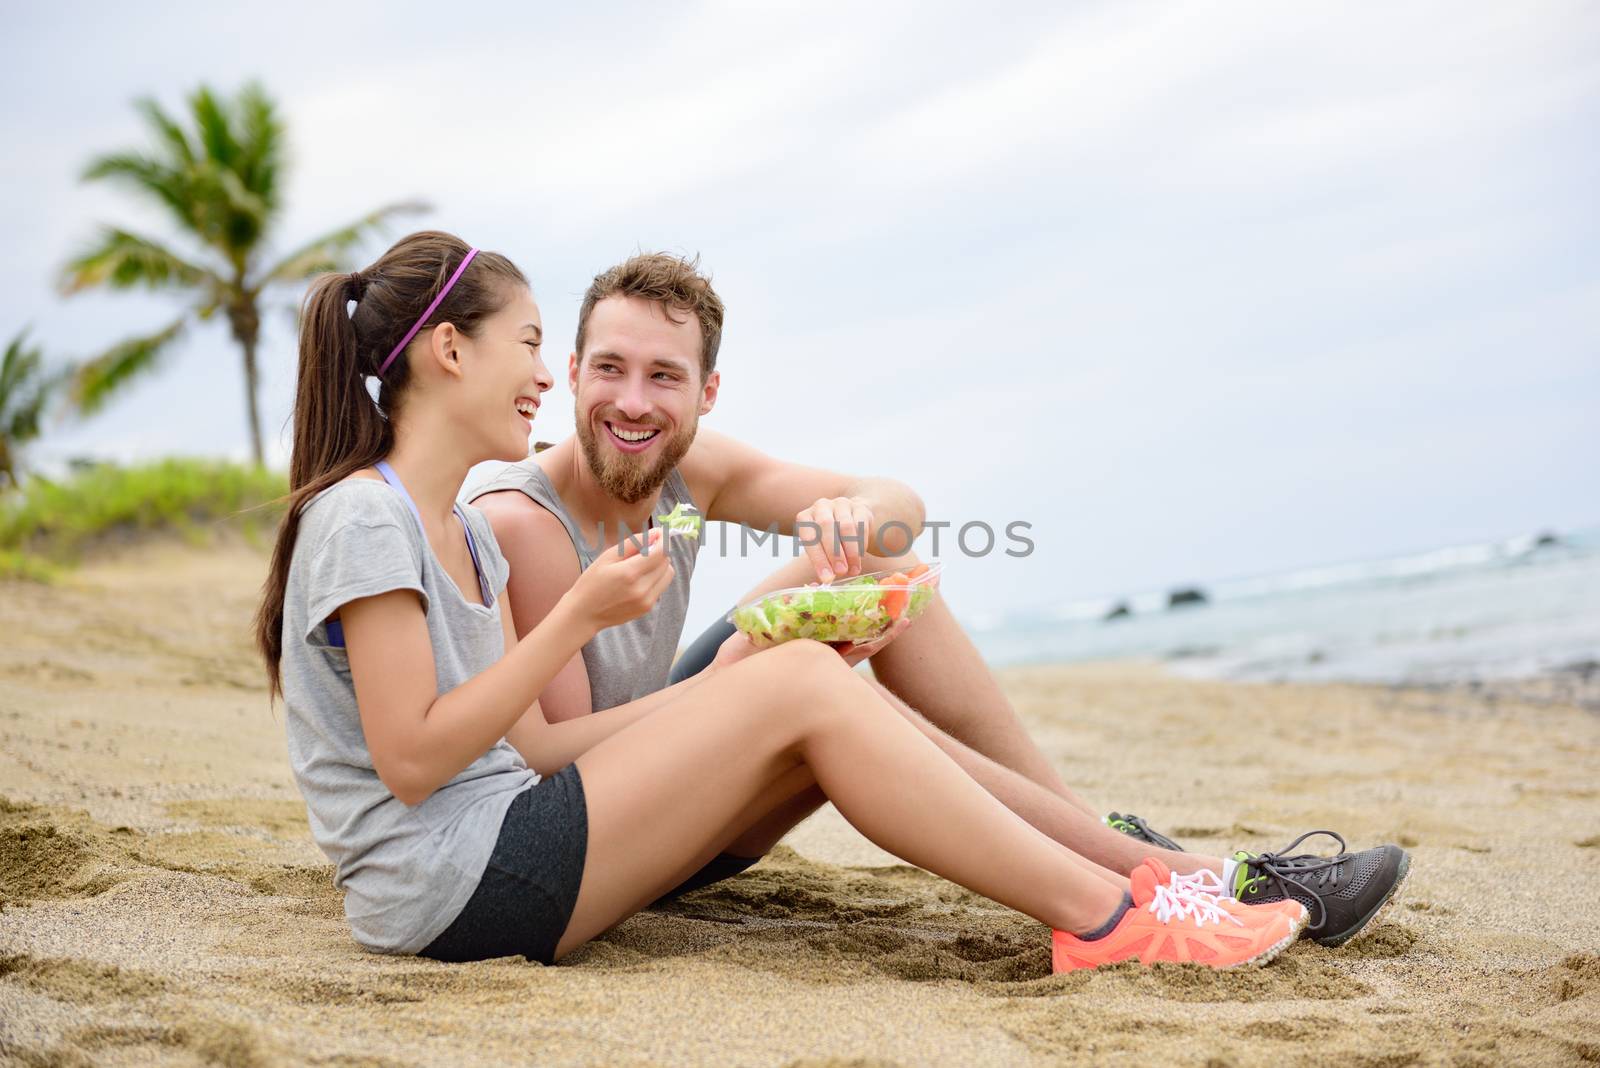 Salad - healthy fitness woman and man couple laughing eating food lunch sitting on beach after workout. Mixed race Asian Caucasian female model and male models in sportswear.